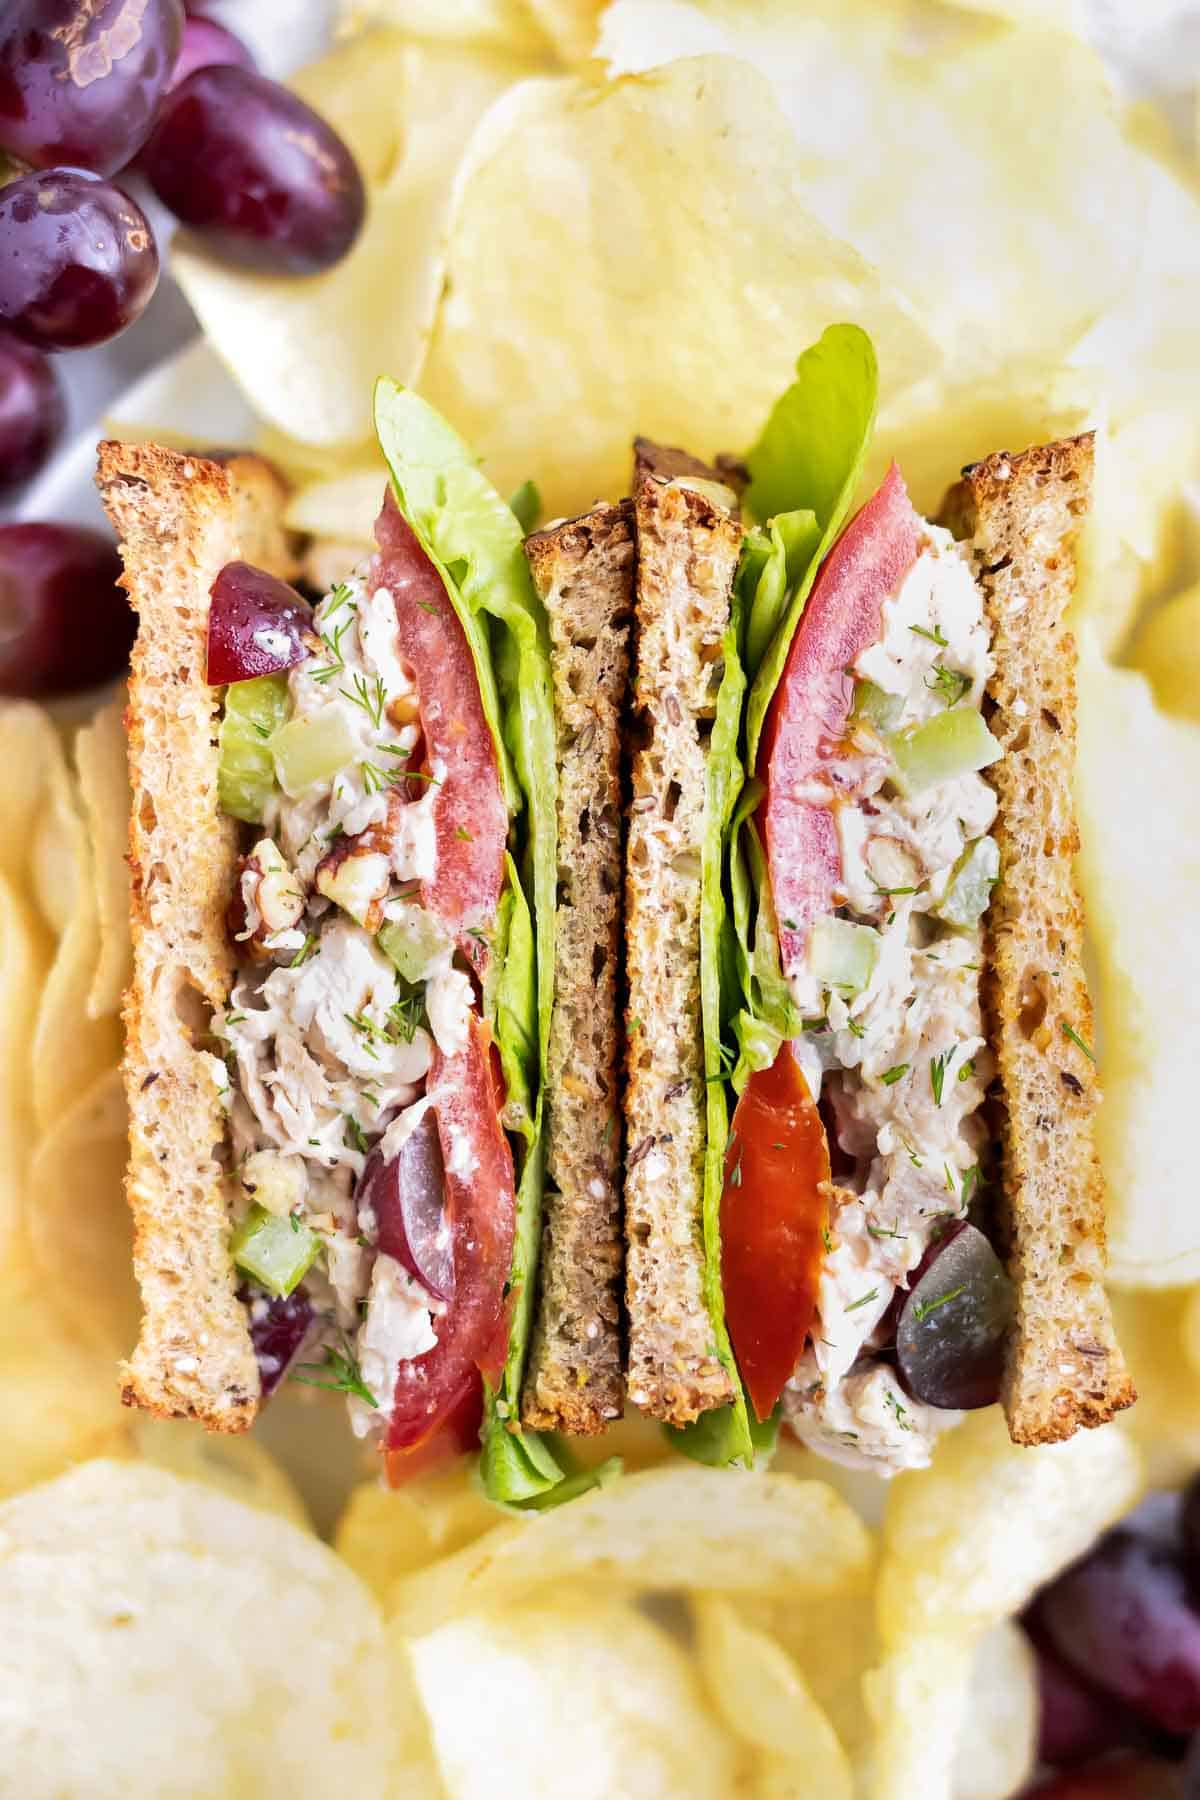 Two halves of a chicken salad sandwich surrounded by potato chips and red seedless grapes.